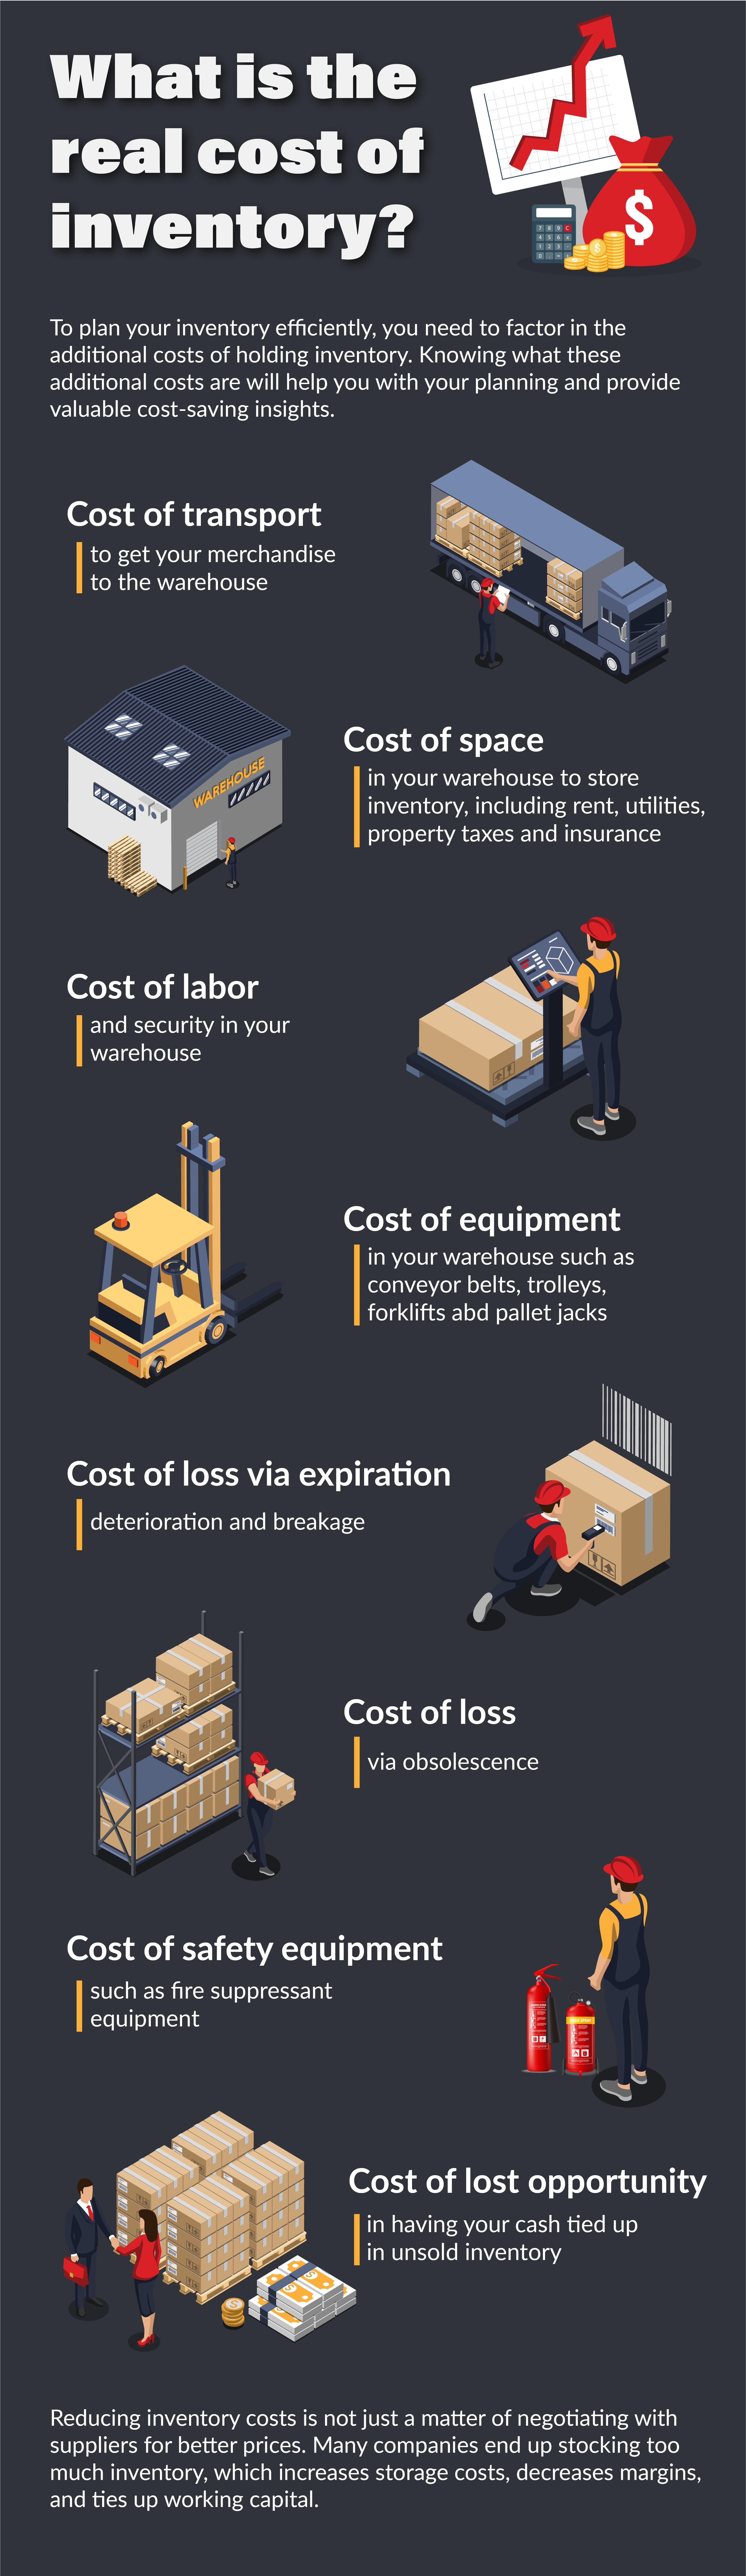 Real cost of inventory infographic final